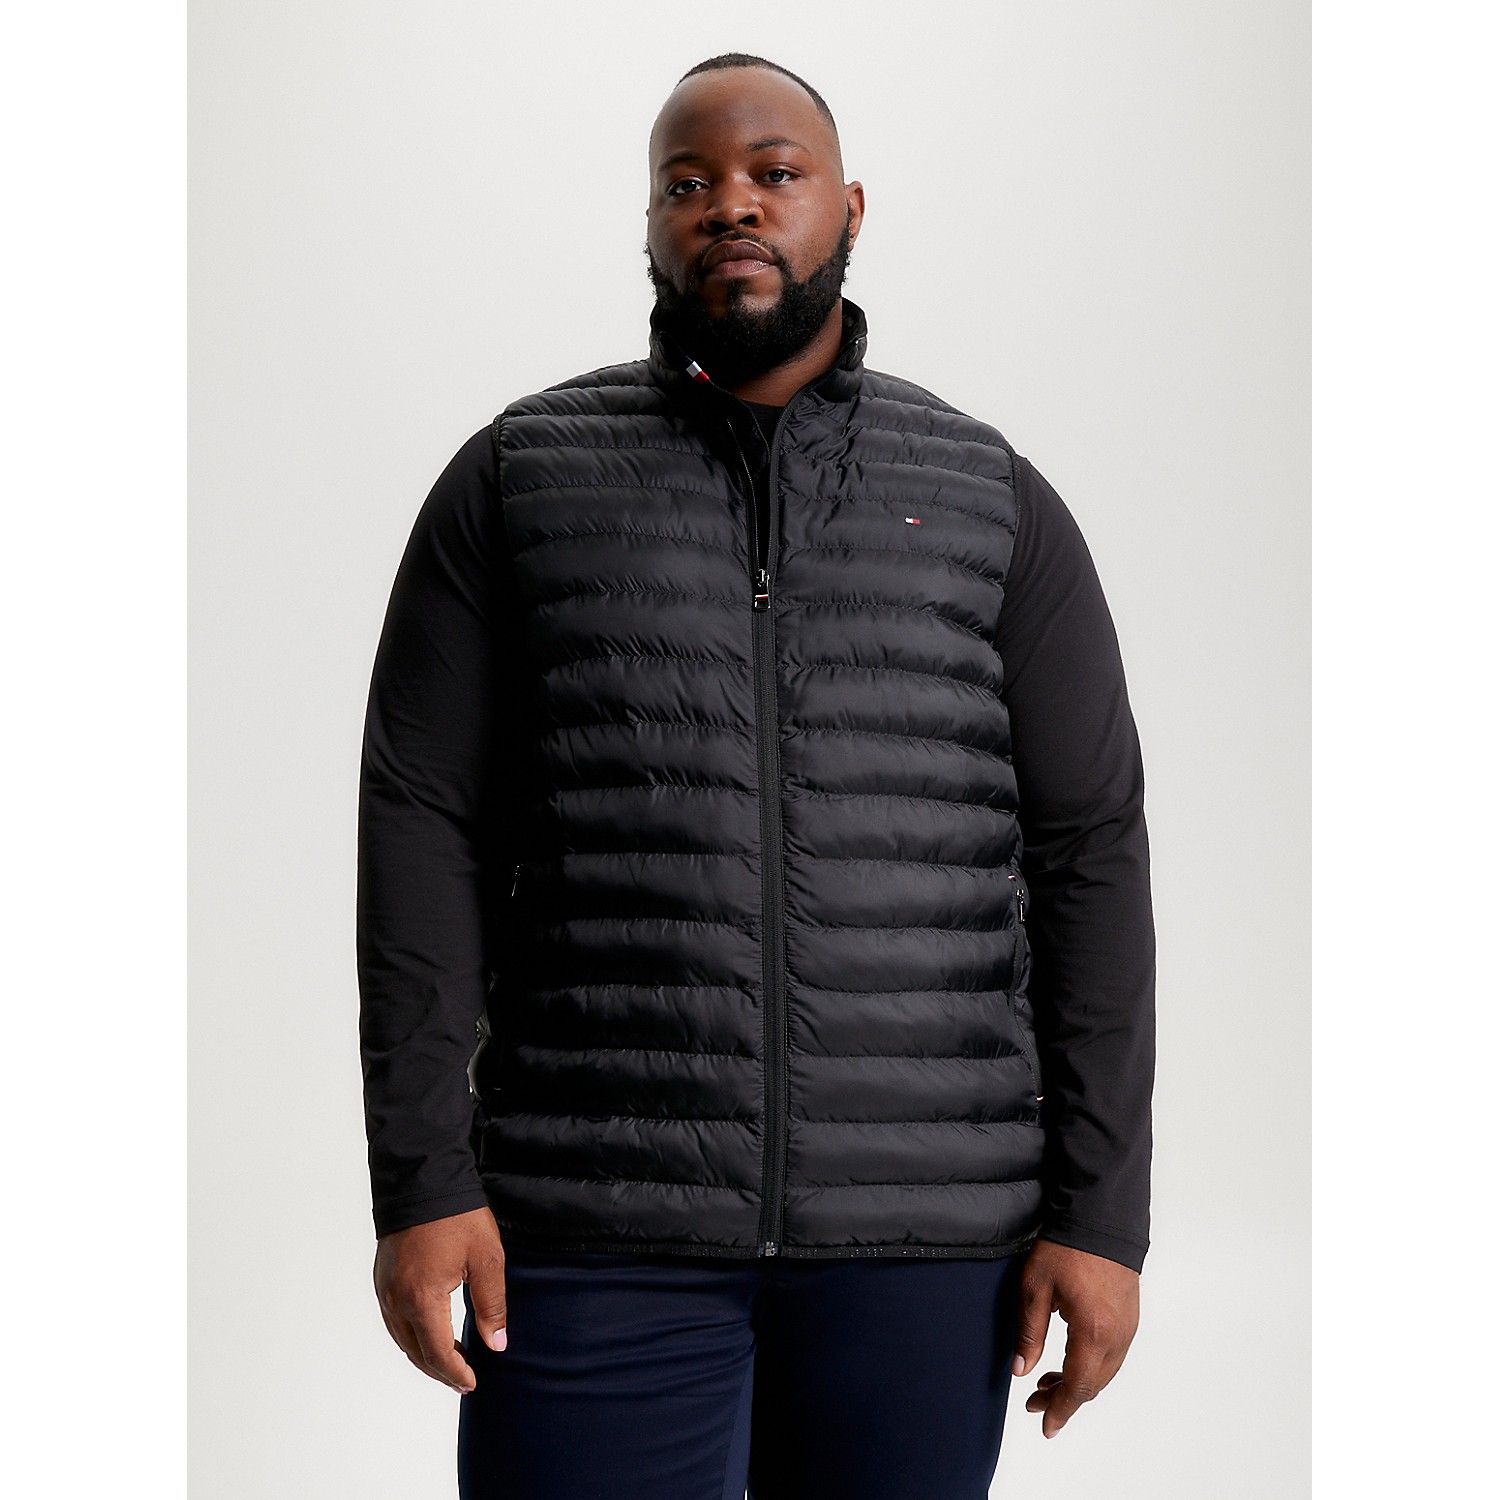 TOMMY HILFIGER Big and Tall Recycled Packable Vest